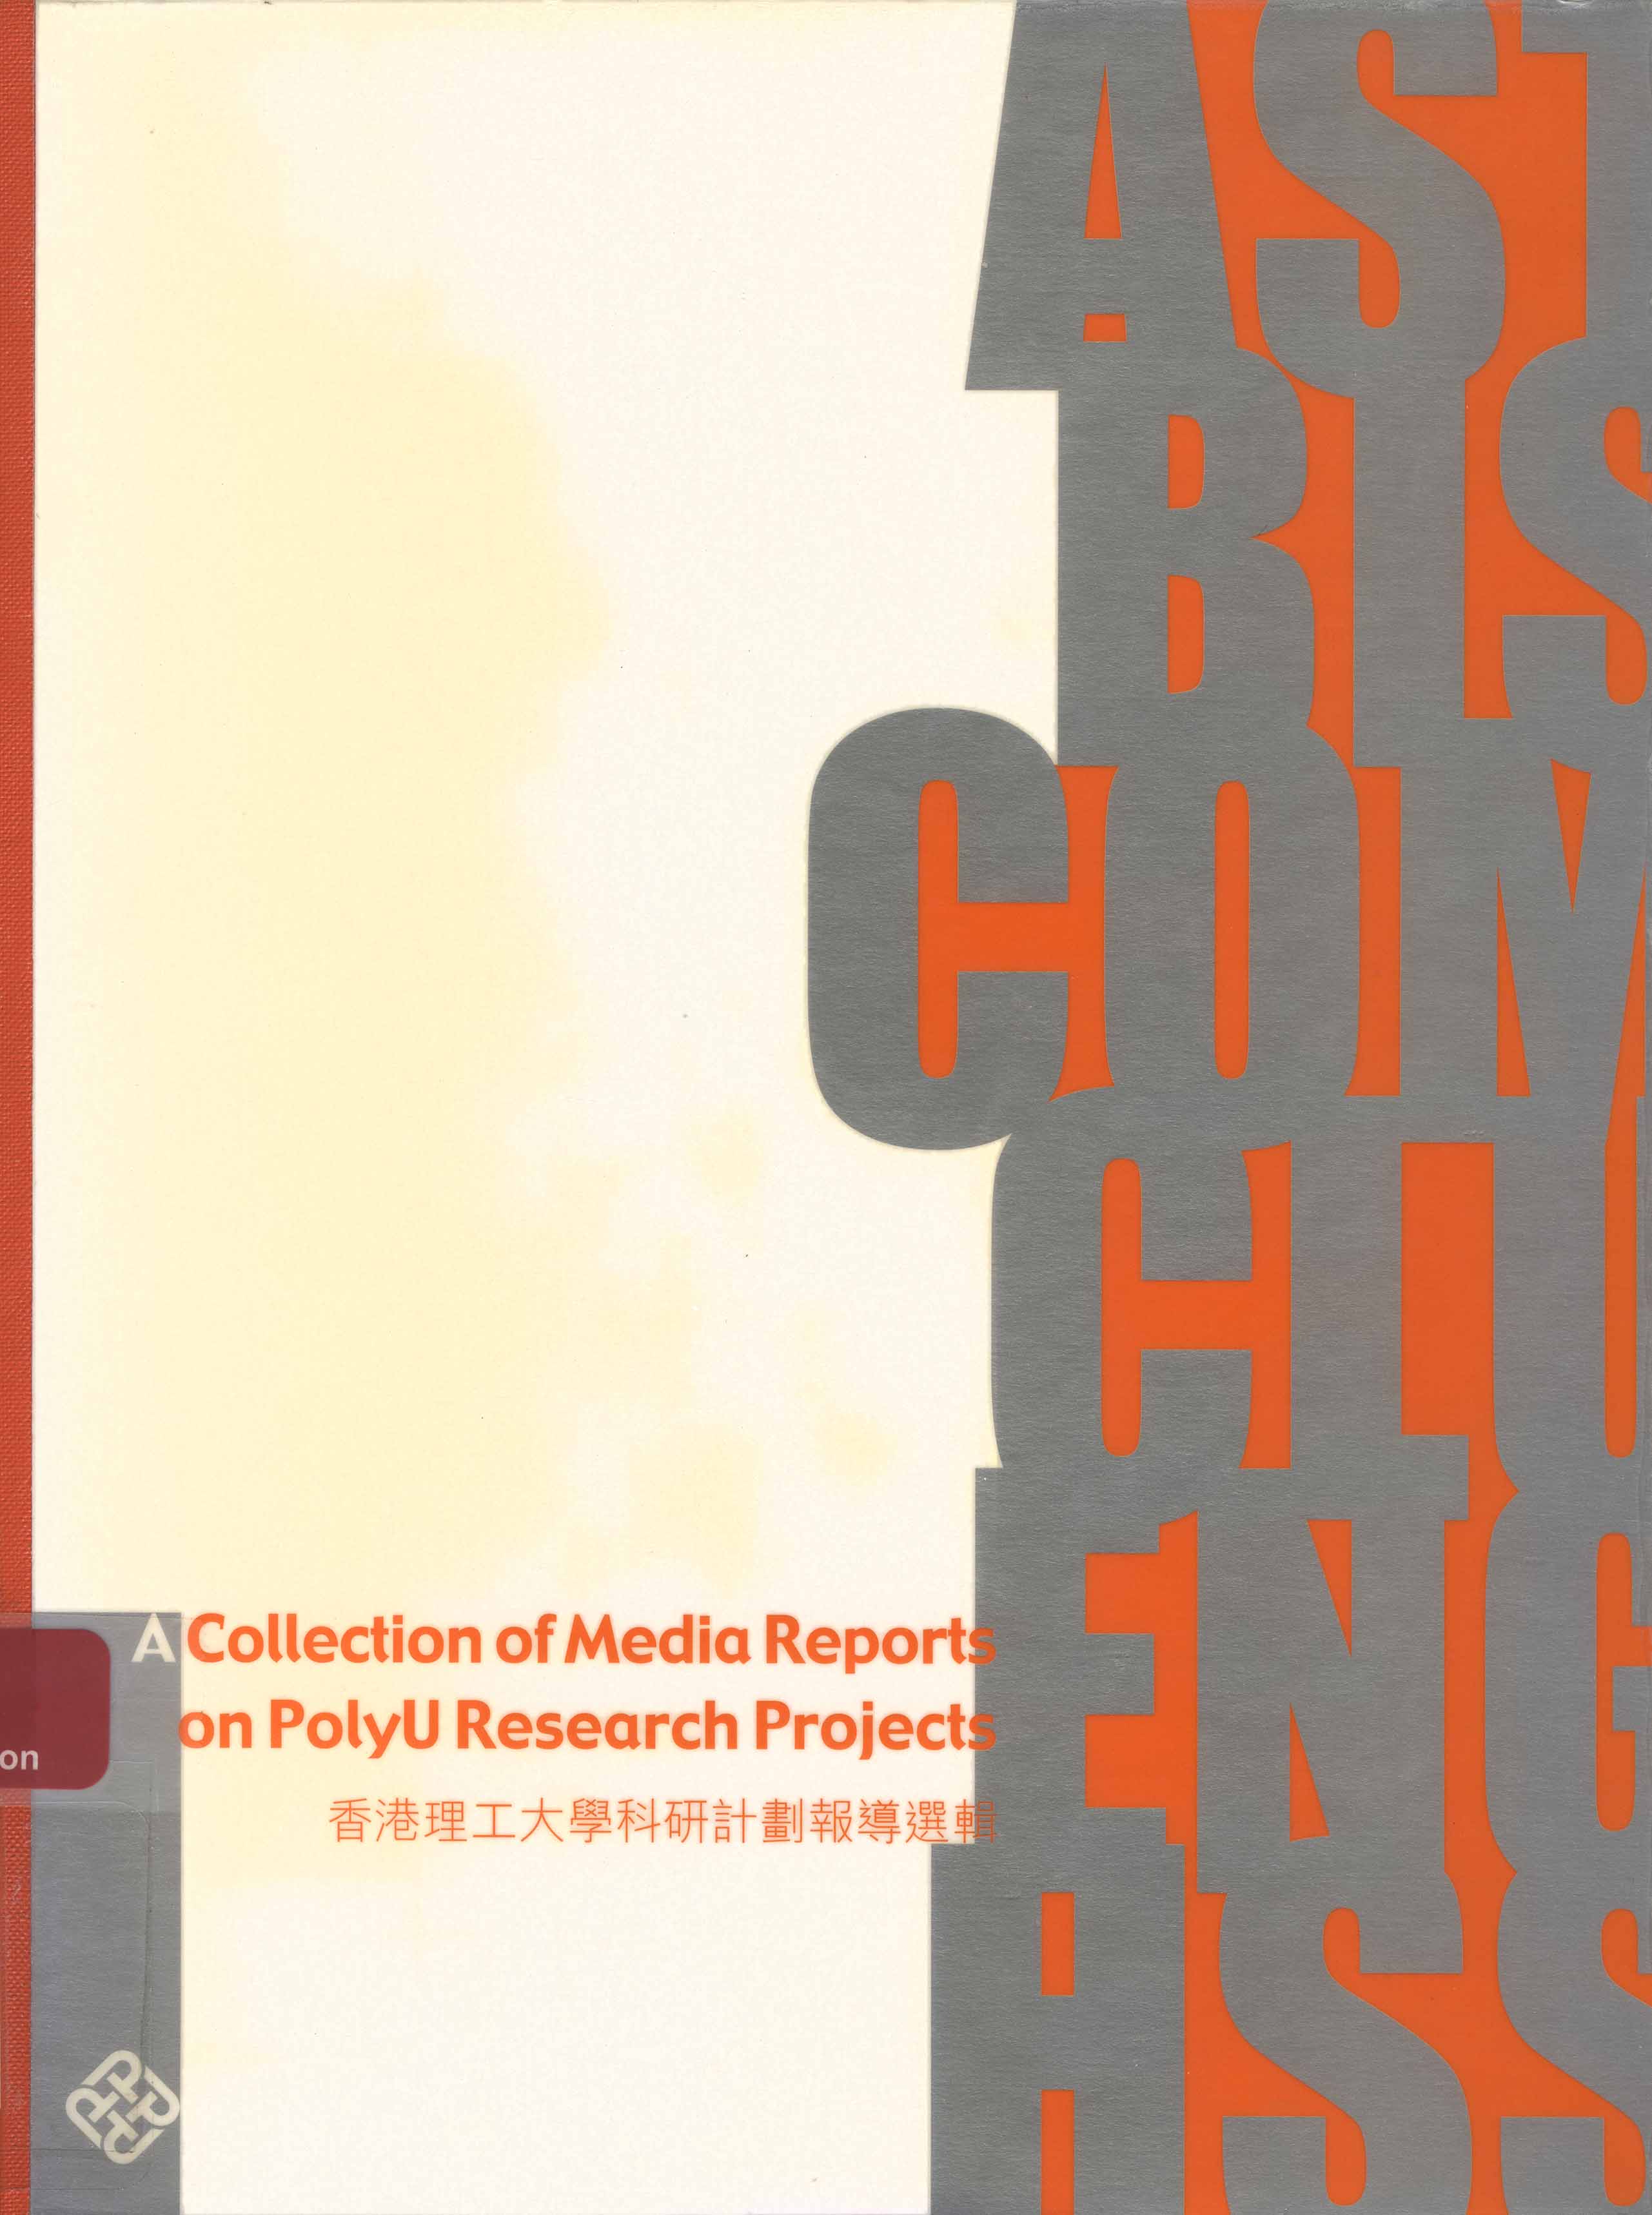 A collection of media reports on PolyU research projects